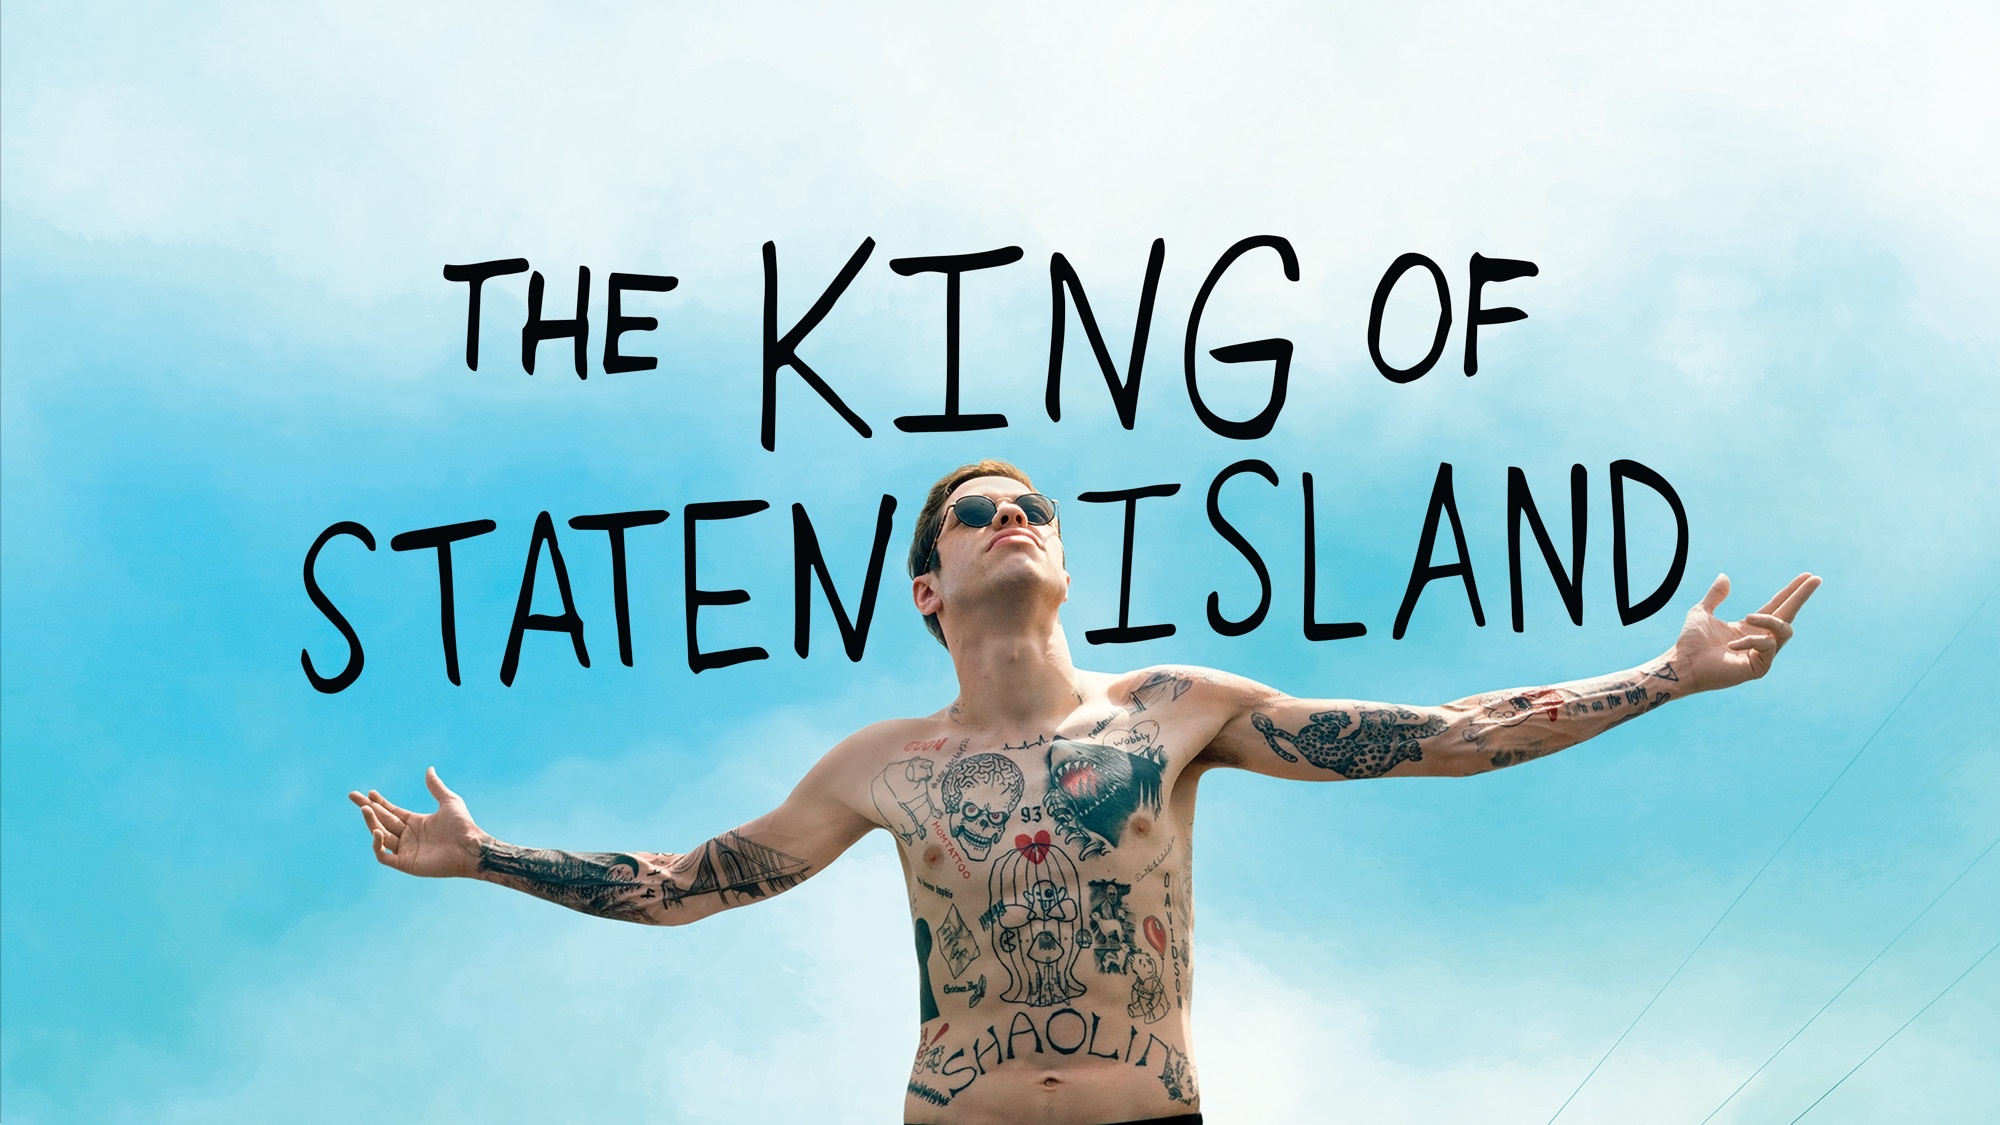 The King of Staten Island, HD wallpapers and backgrounds, 2000x1130 HD Desktop